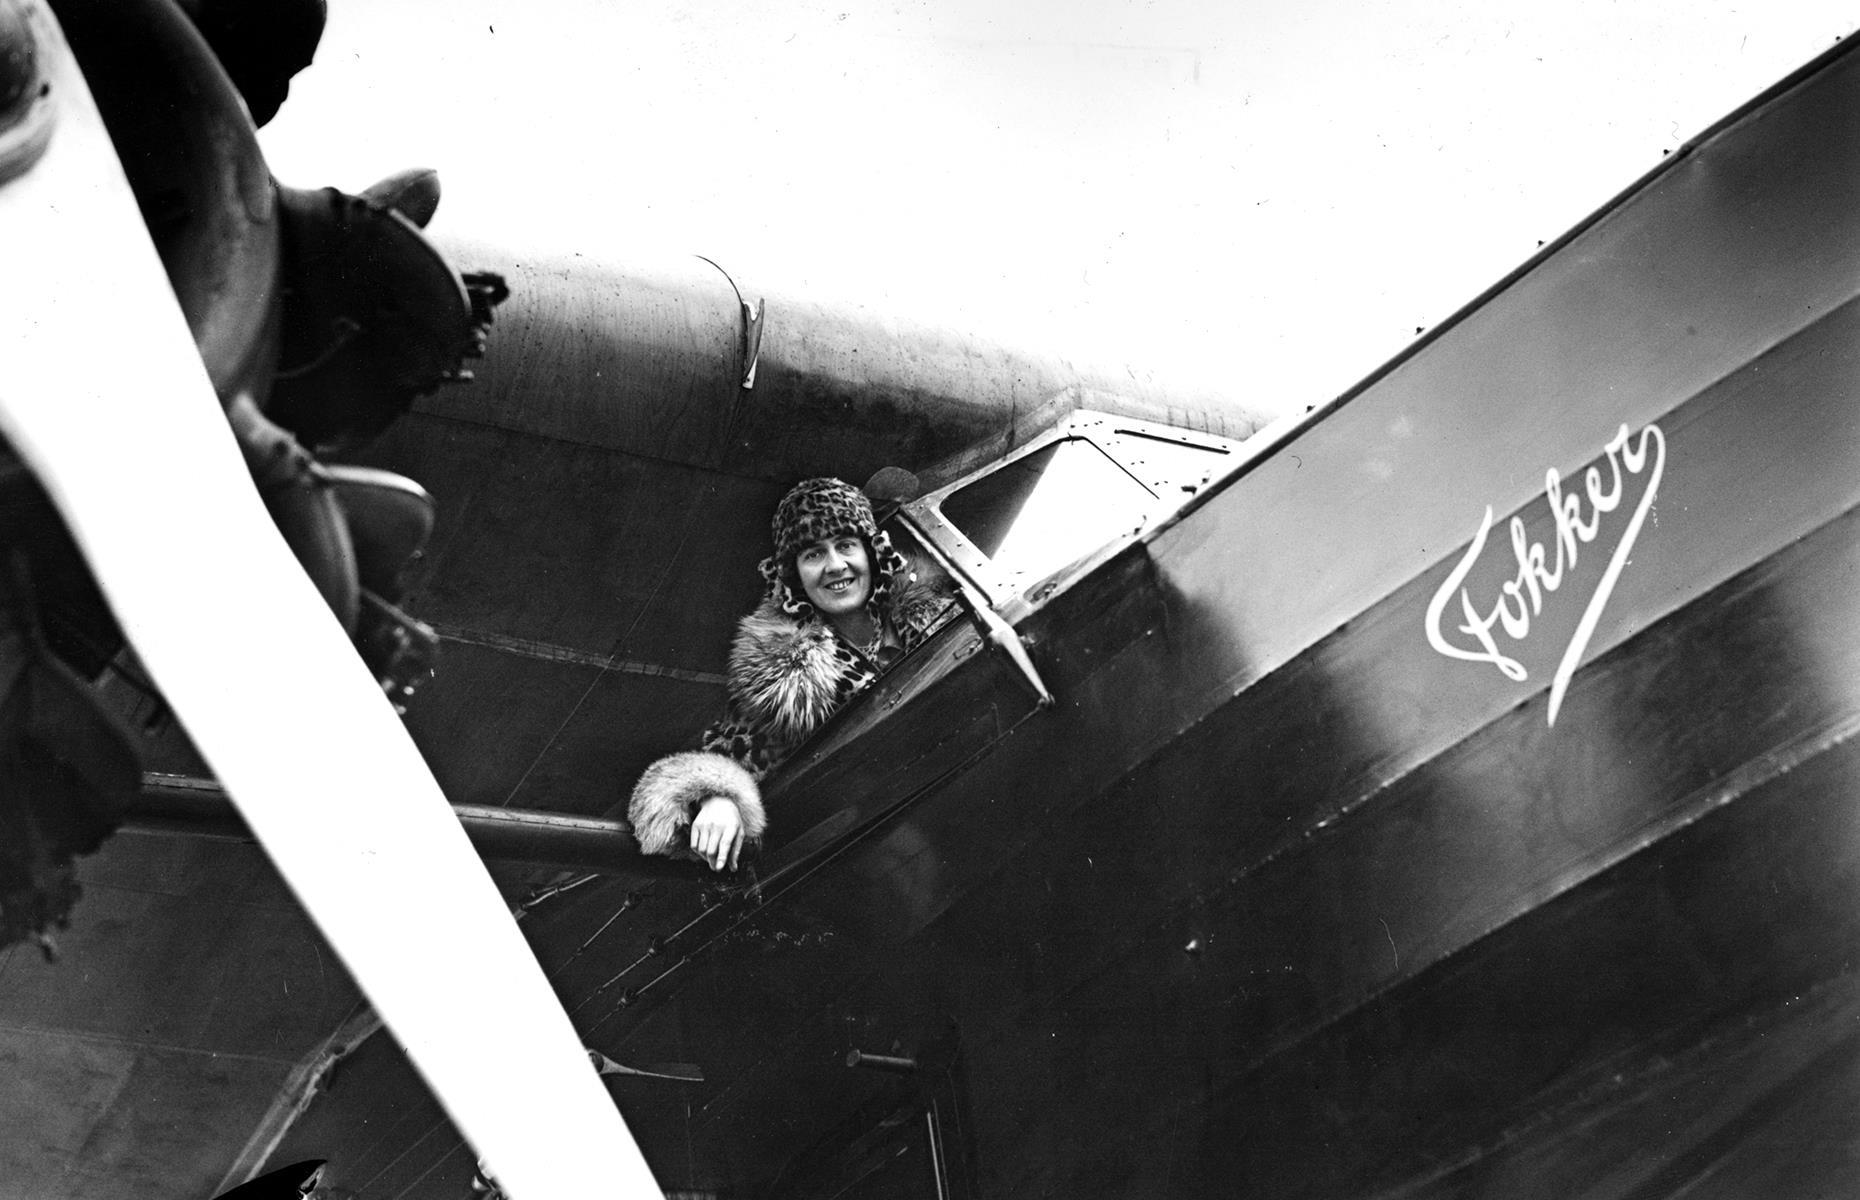 Slide 4 of 51: Other notable early commercial airlines included the now defunct Pan American Airways and KLM Royal Dutch Airlines, which is still in operation. KLM reached destinations all over Europe, including Copenhagen, London and Paris. This photo shows Lady Heath, the first female passenger-line pilot, in a KLM-owned Fokker aircraft.